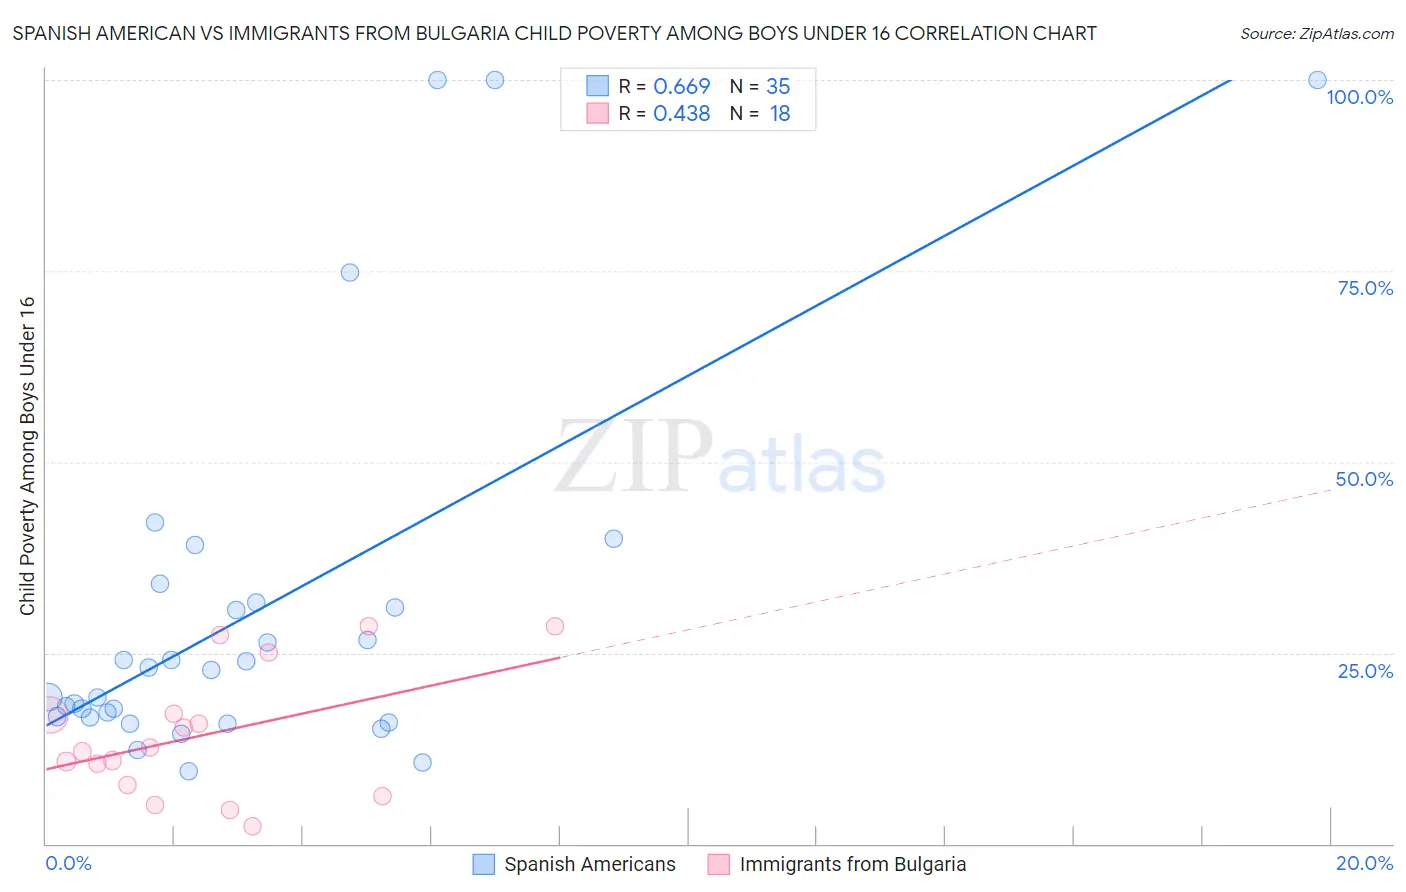 Spanish American vs Immigrants from Bulgaria Child Poverty Among Boys Under 16